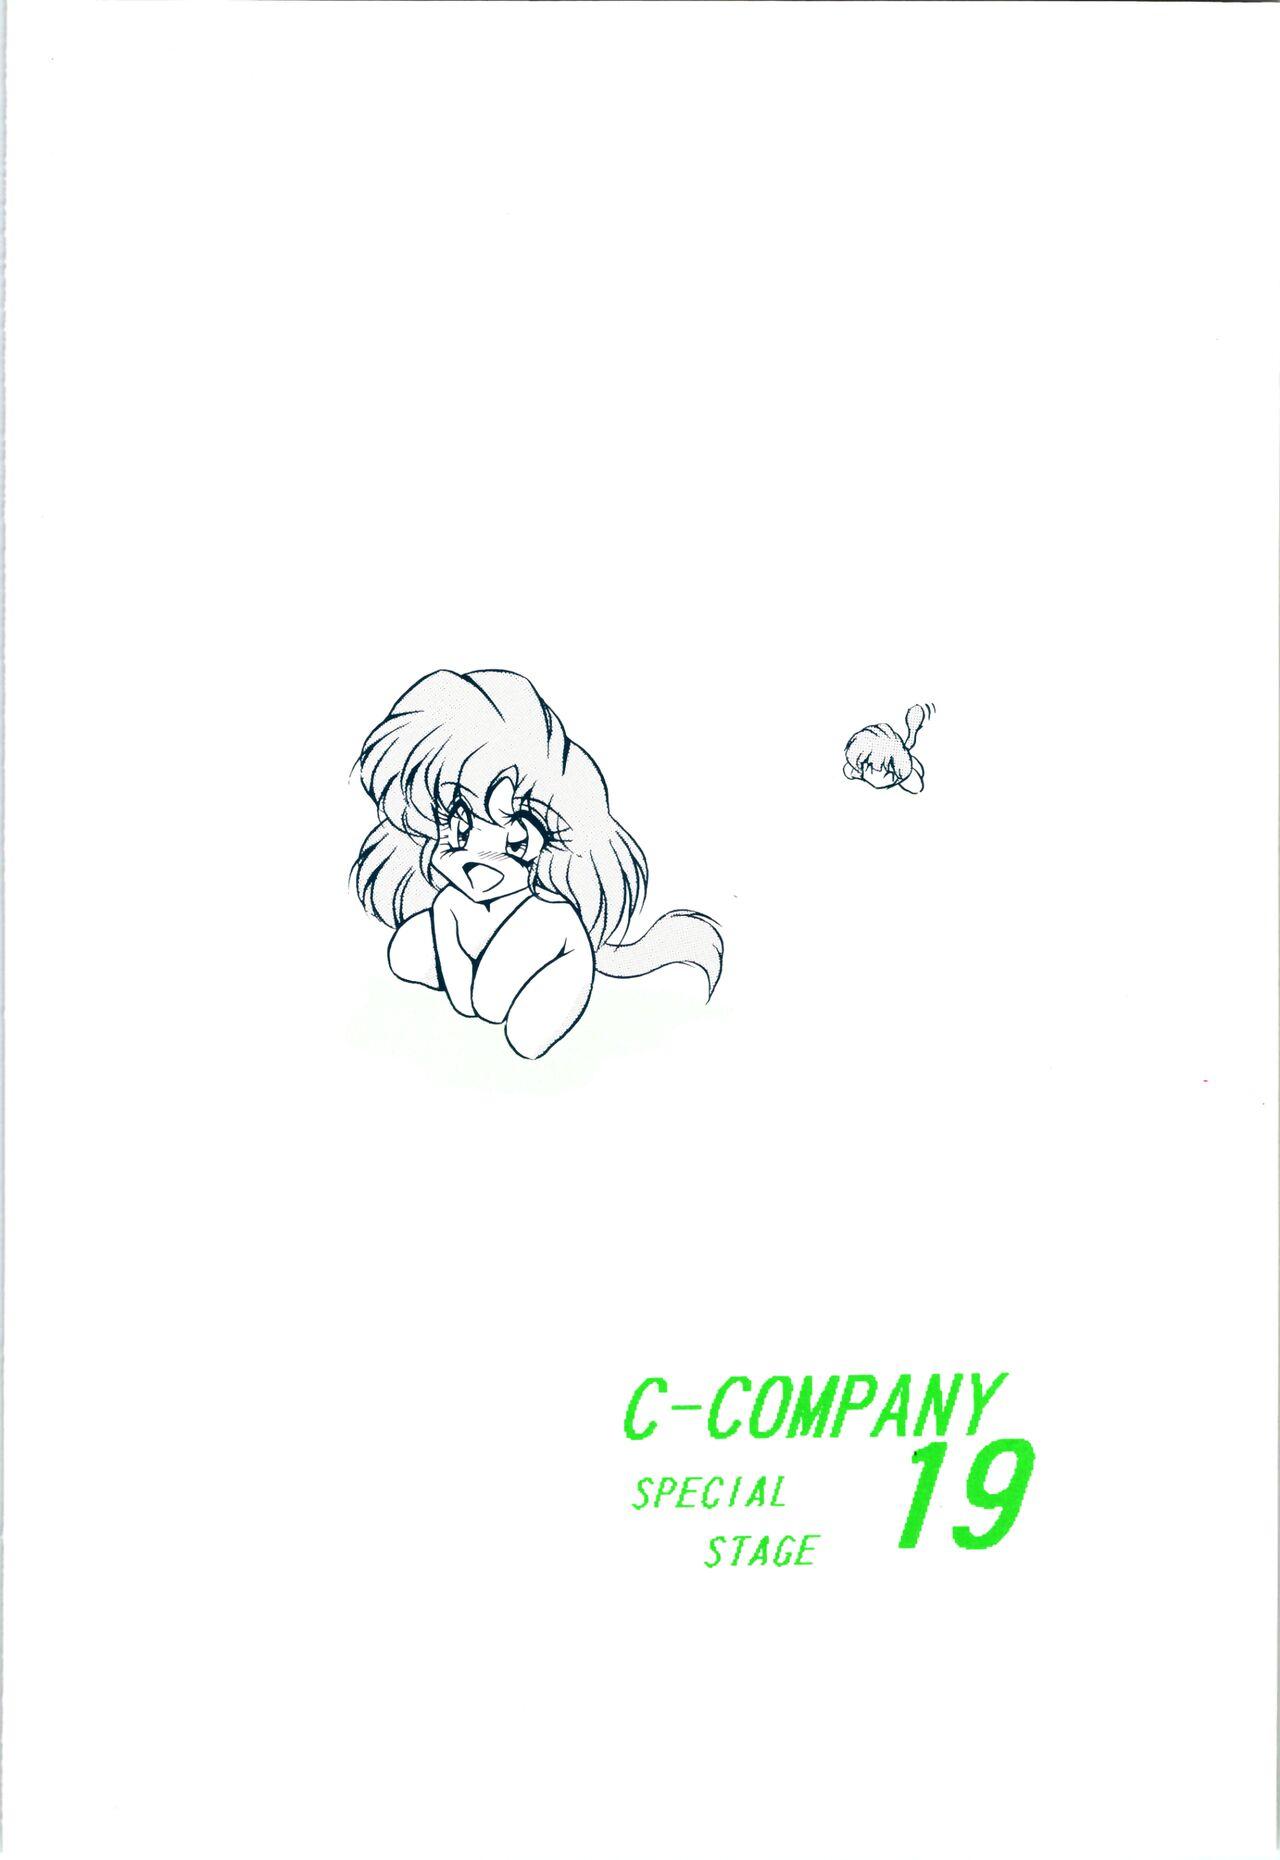 C-COMPANY SPECIAL STAGE 19 55